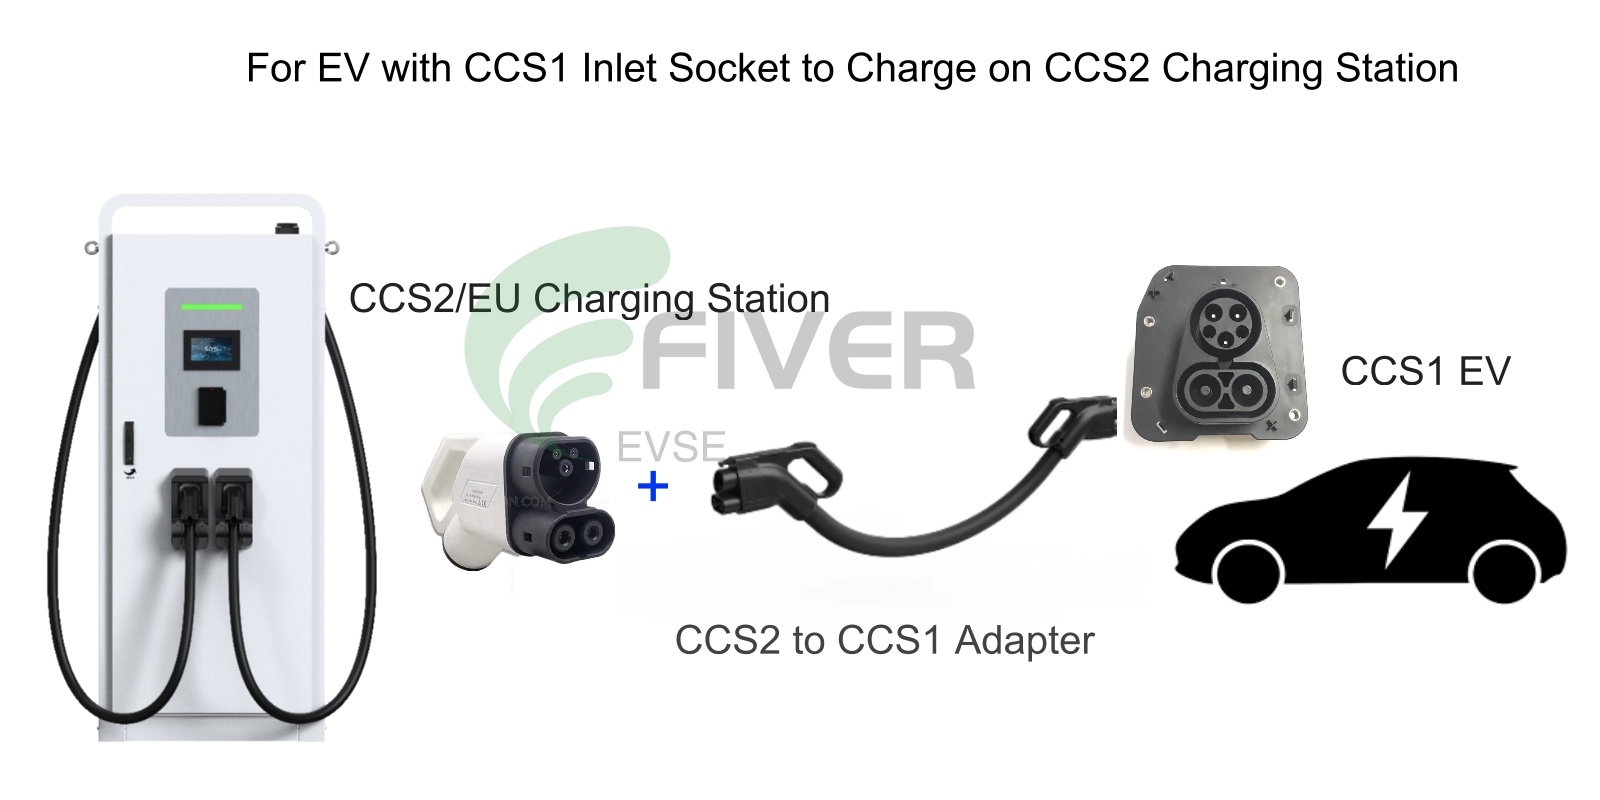 How to charge your ccs1 car on ccs2 charging station?